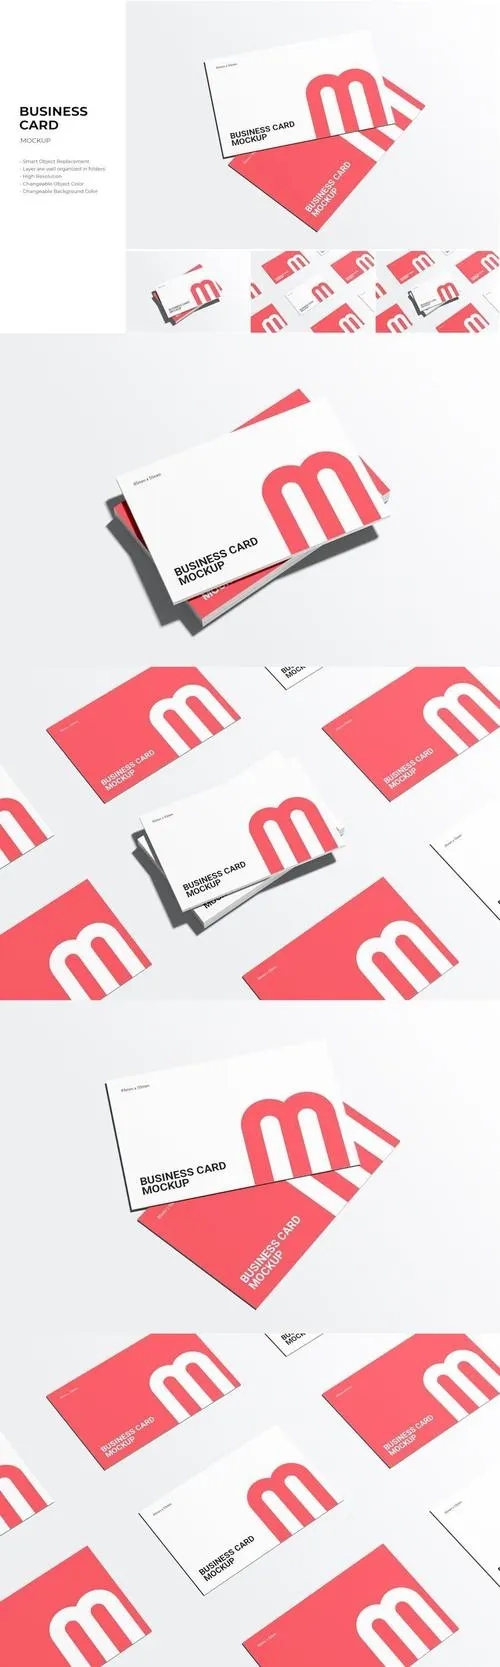 Perspective Business Card Mockup